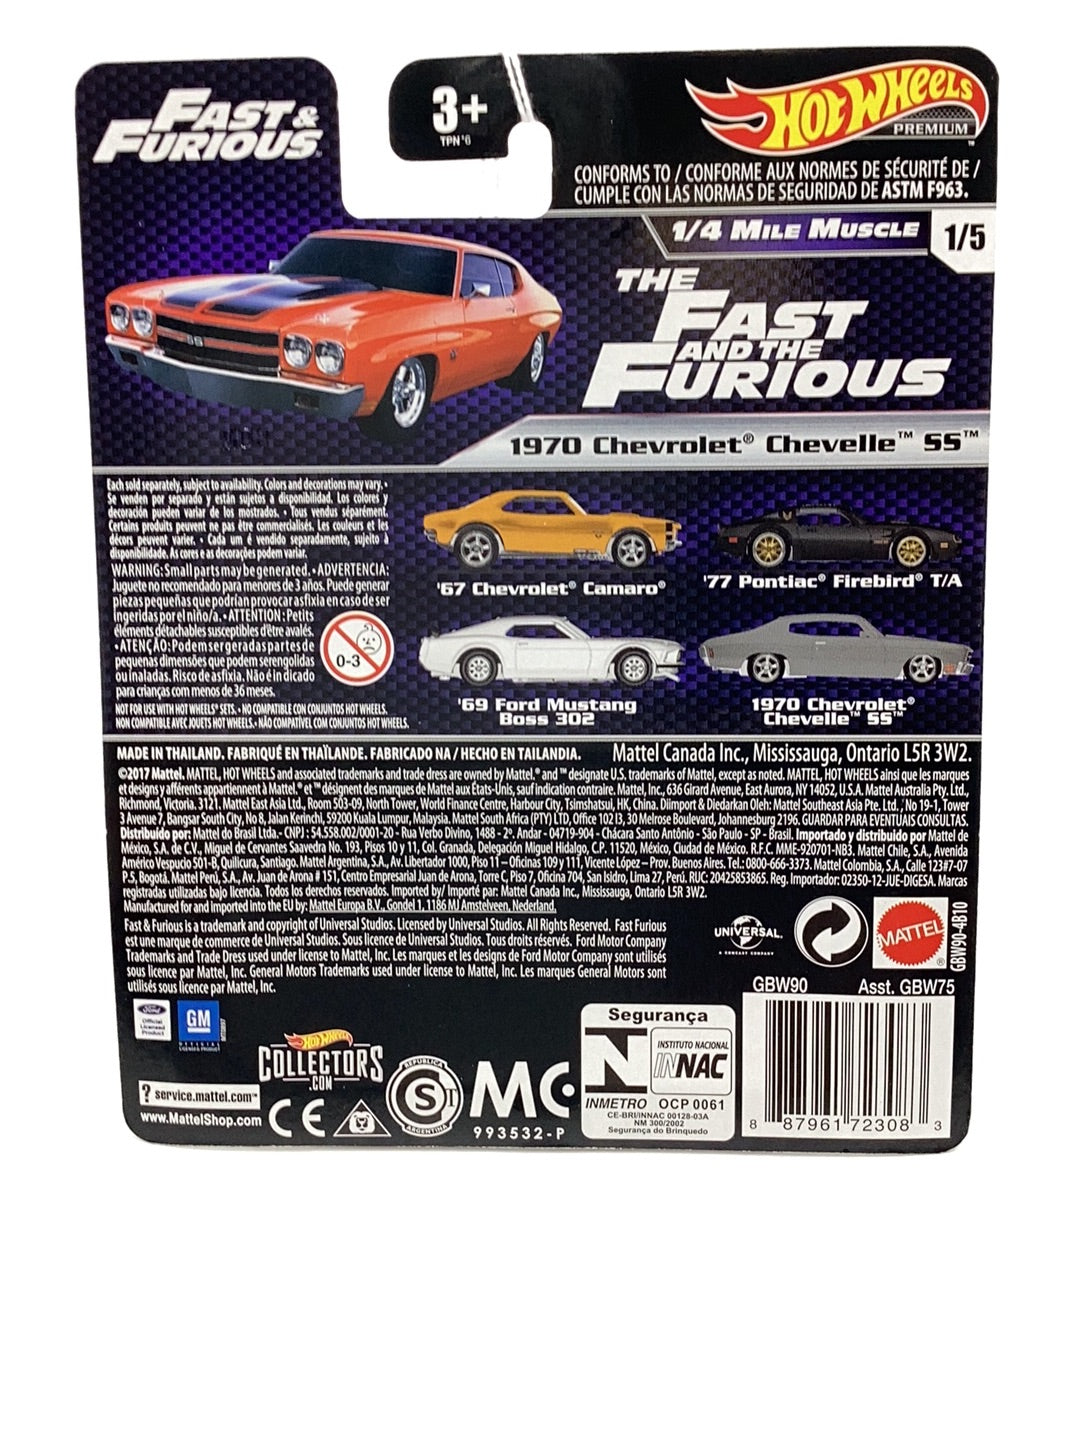 Hot wheels premium fast and furious 1/4 mile Muscle 1970 Chevrolet Chevelle SS 246H